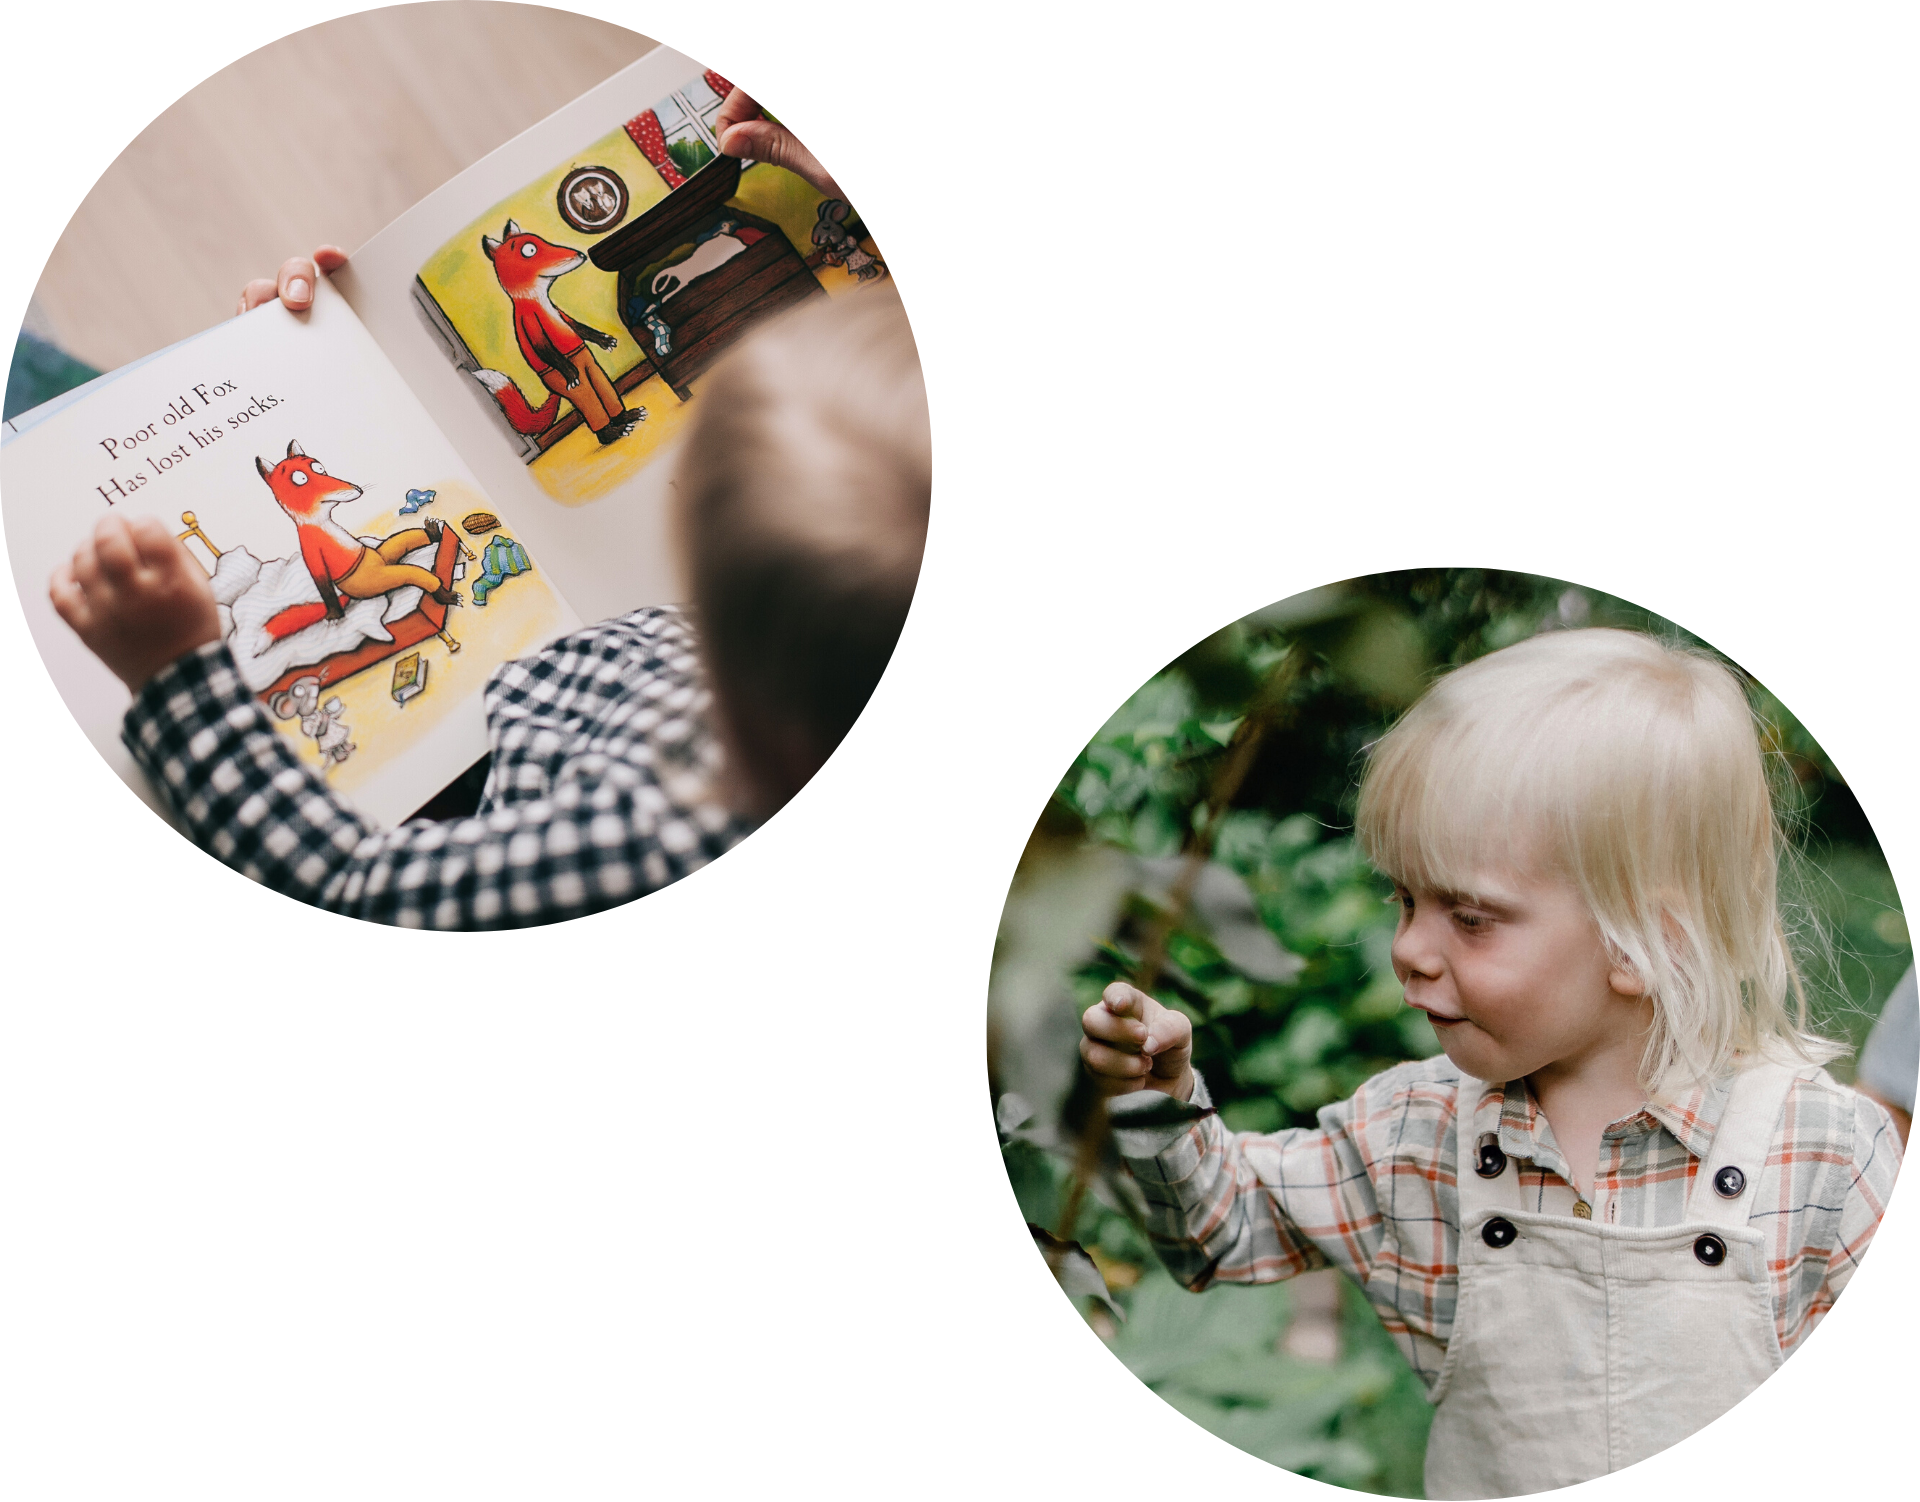 Two circle pictures show a young blond girl, who is looking through a book and playing outside in a garden. 